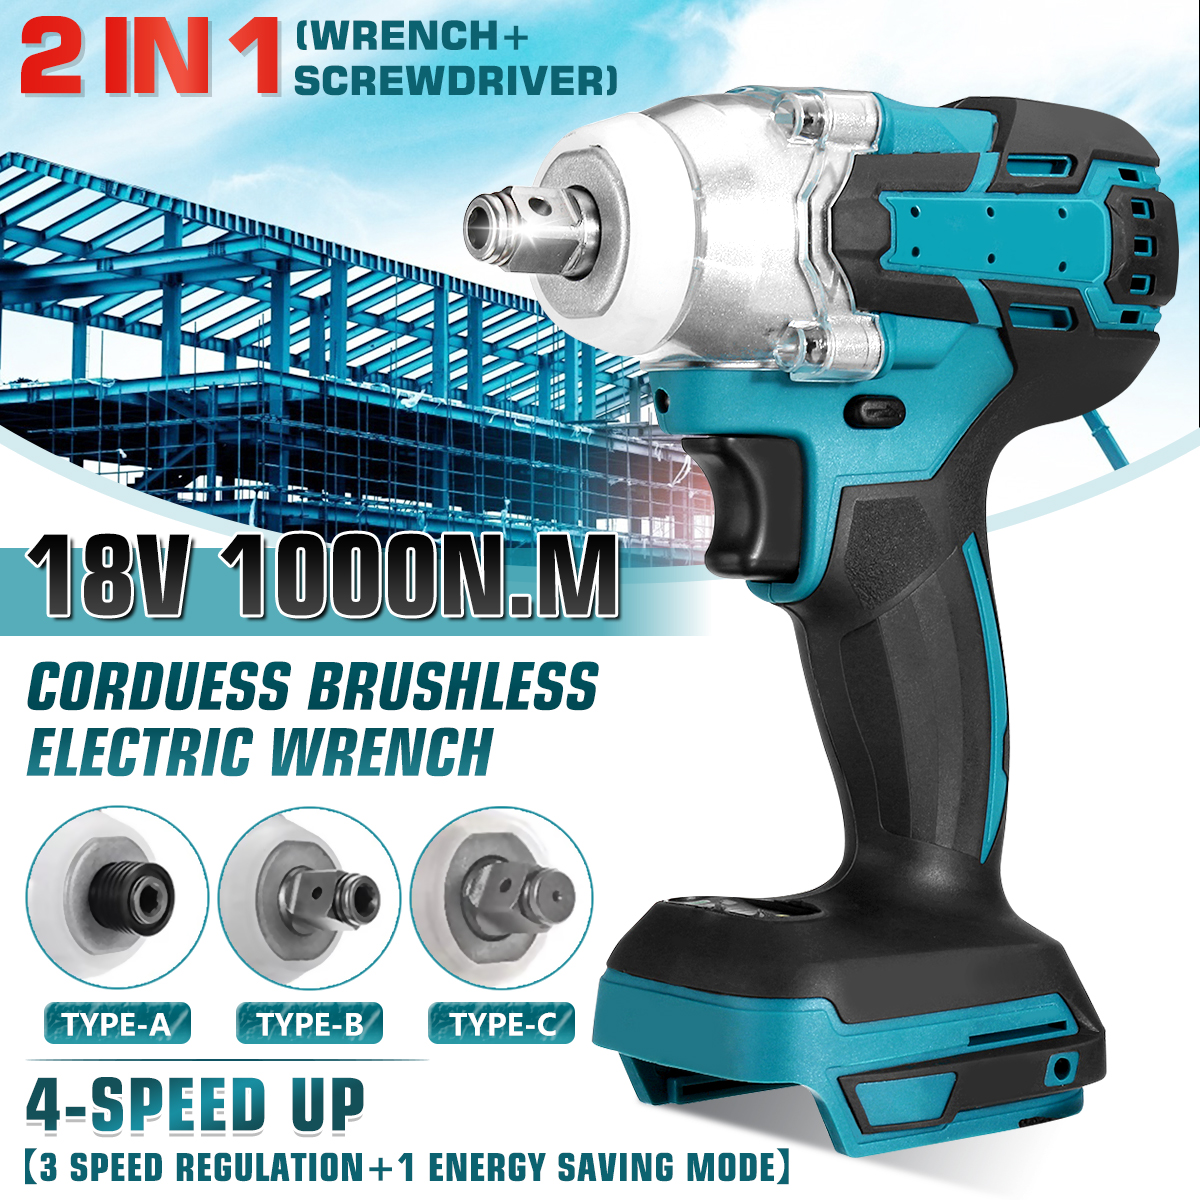 Upgrade-4-Speed-Brushless-Cordless-Electric-Impact-Wrench-Rechargeable-12-inch-Wrench-Power-Tools-fo-1853856-1